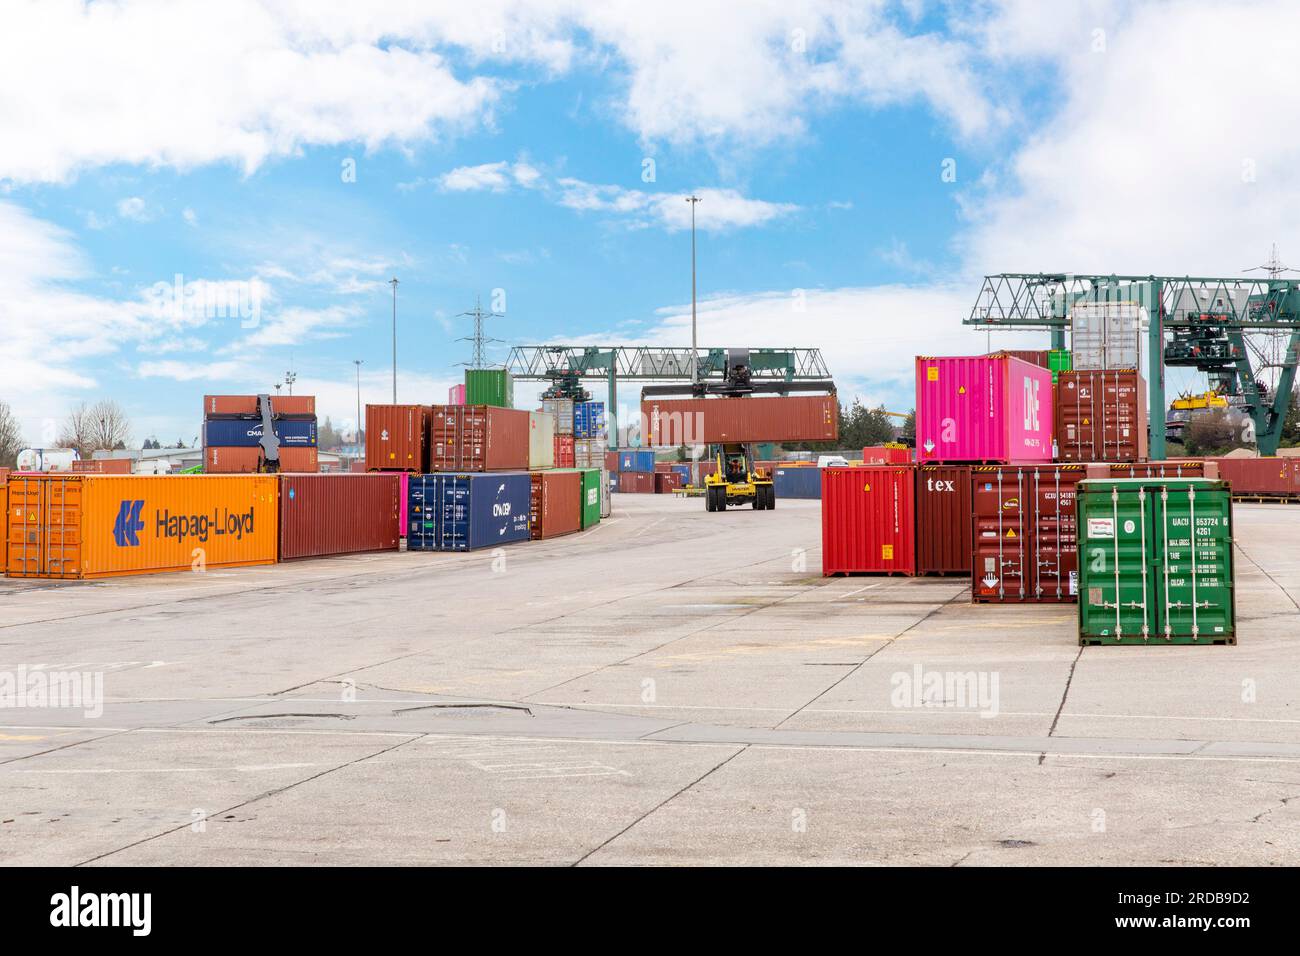 A top loader vehicle moves and stacks intermodal shipping containers at an Inland Container Depot (ICD) in England. Stock Photo